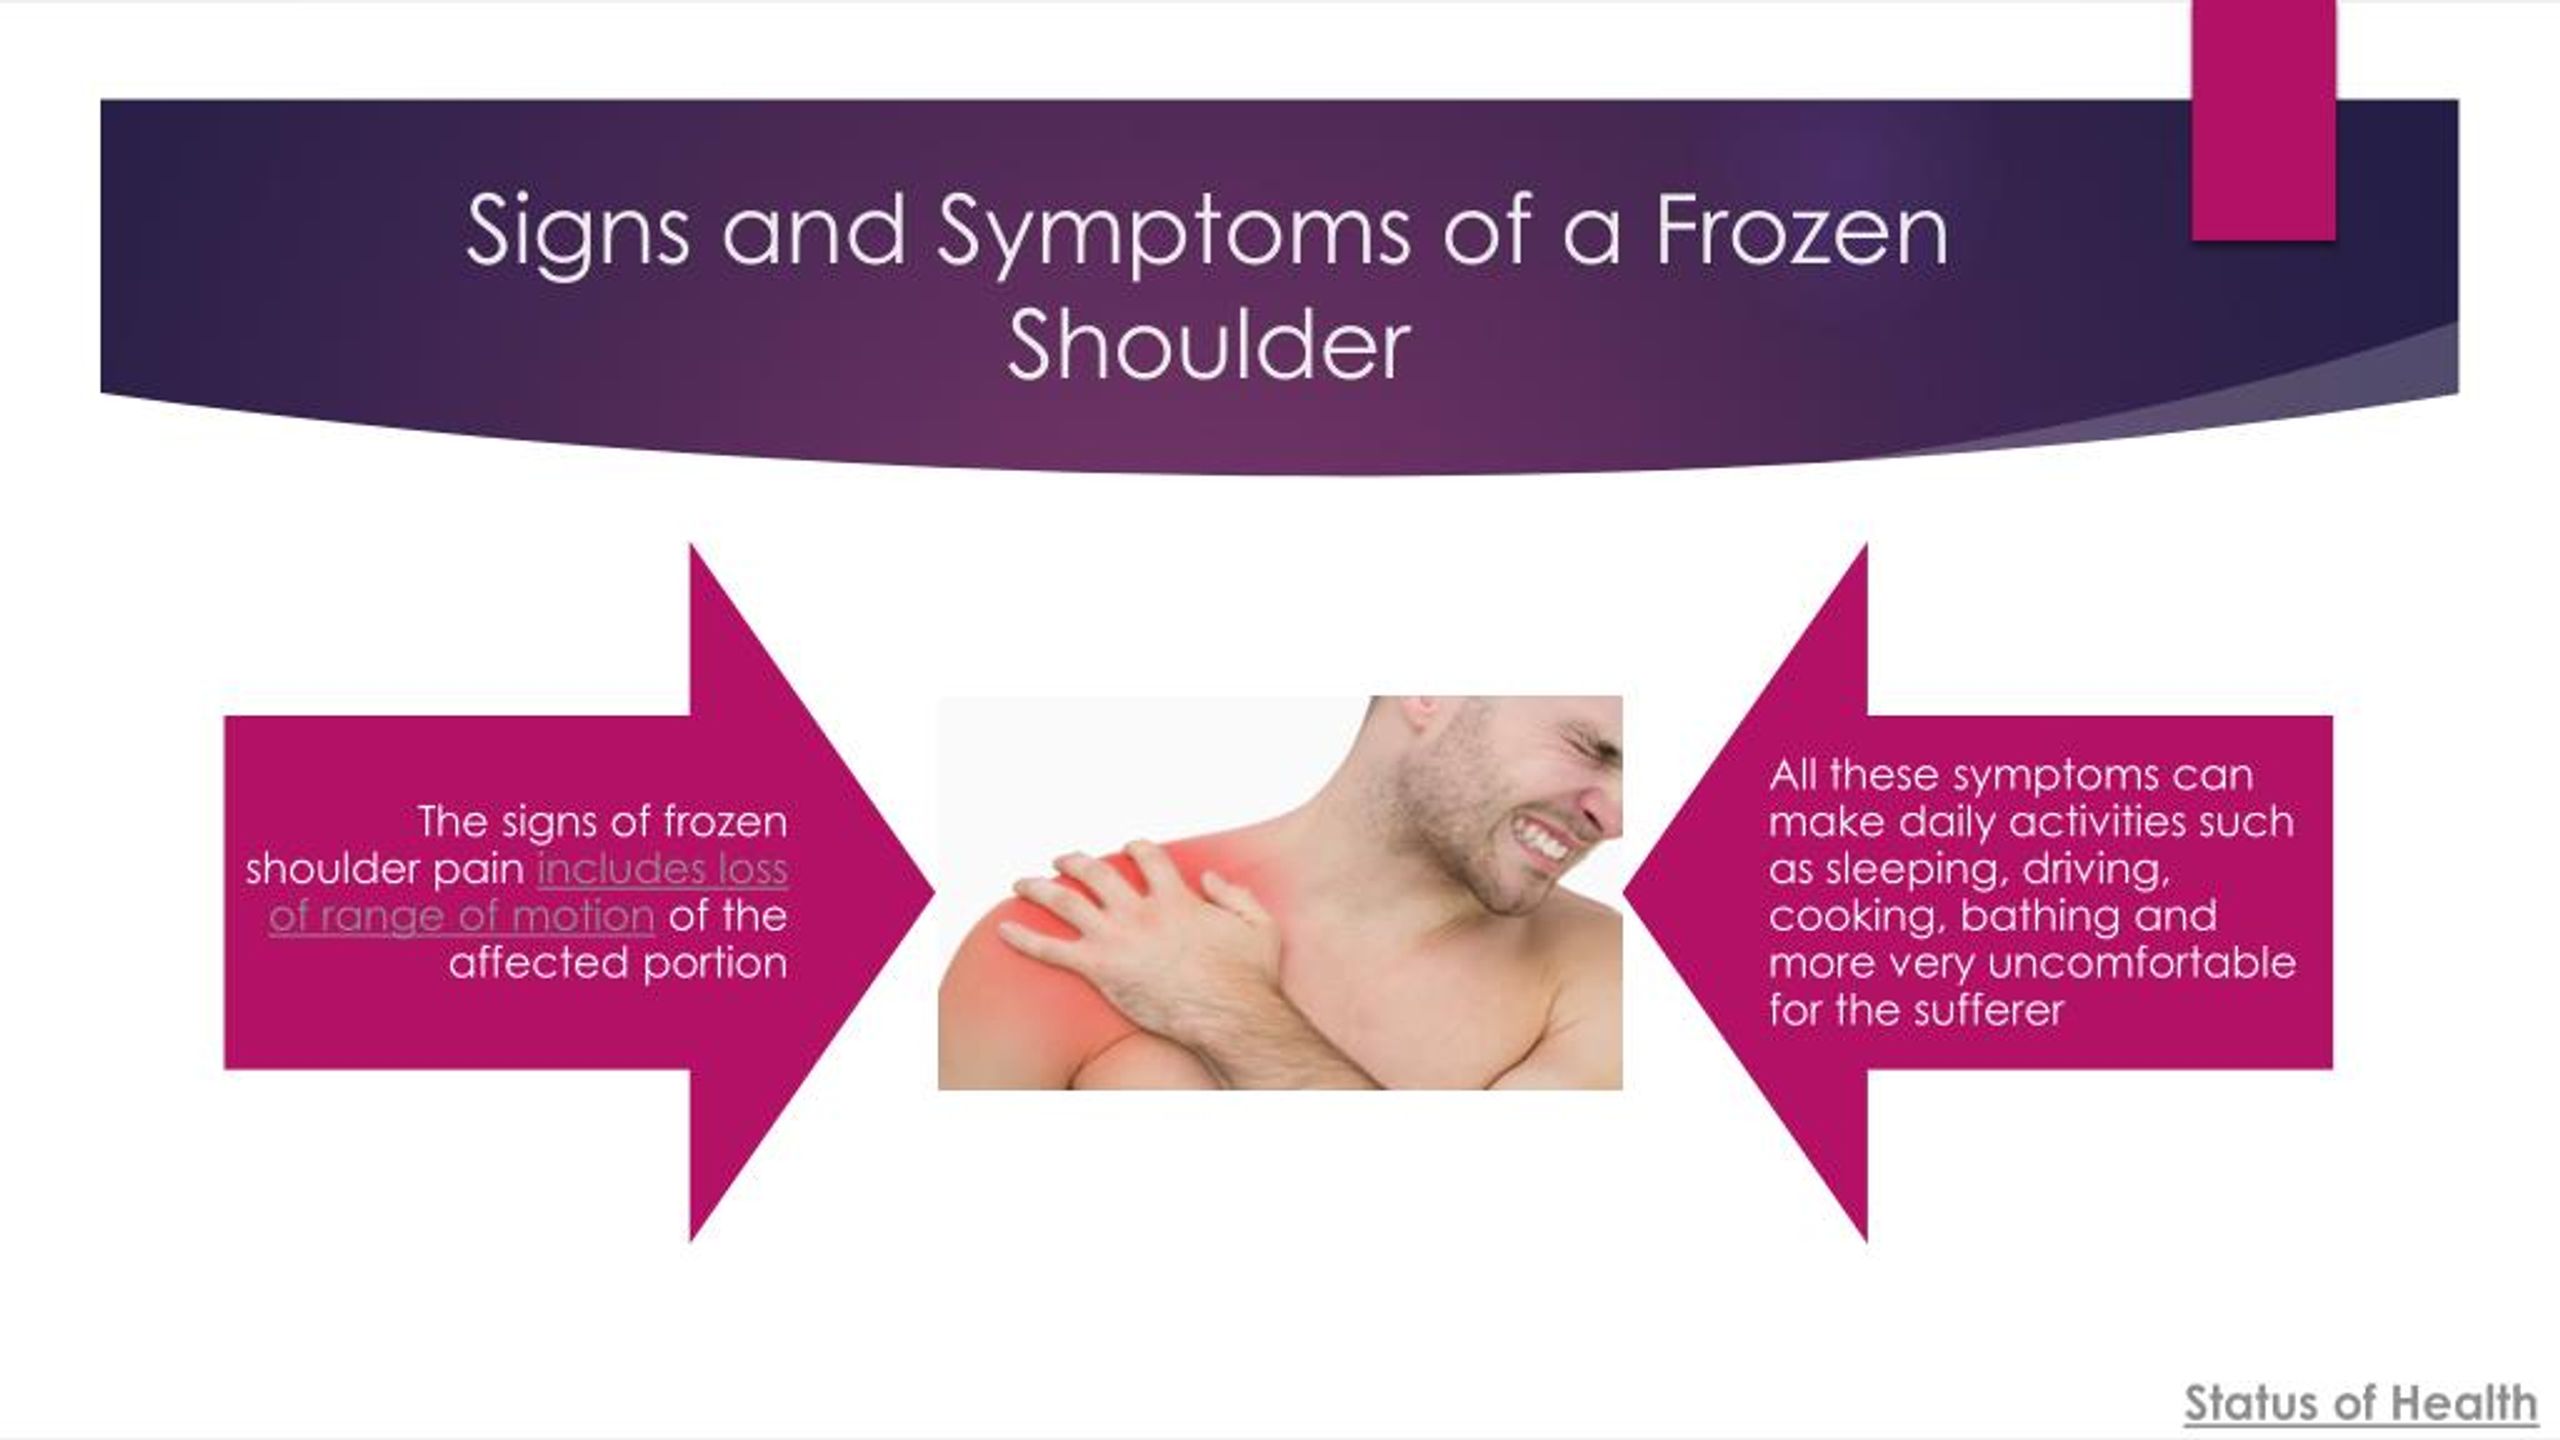 PPT - Everything you need to know about frozen shoulder pain diagnosis ...